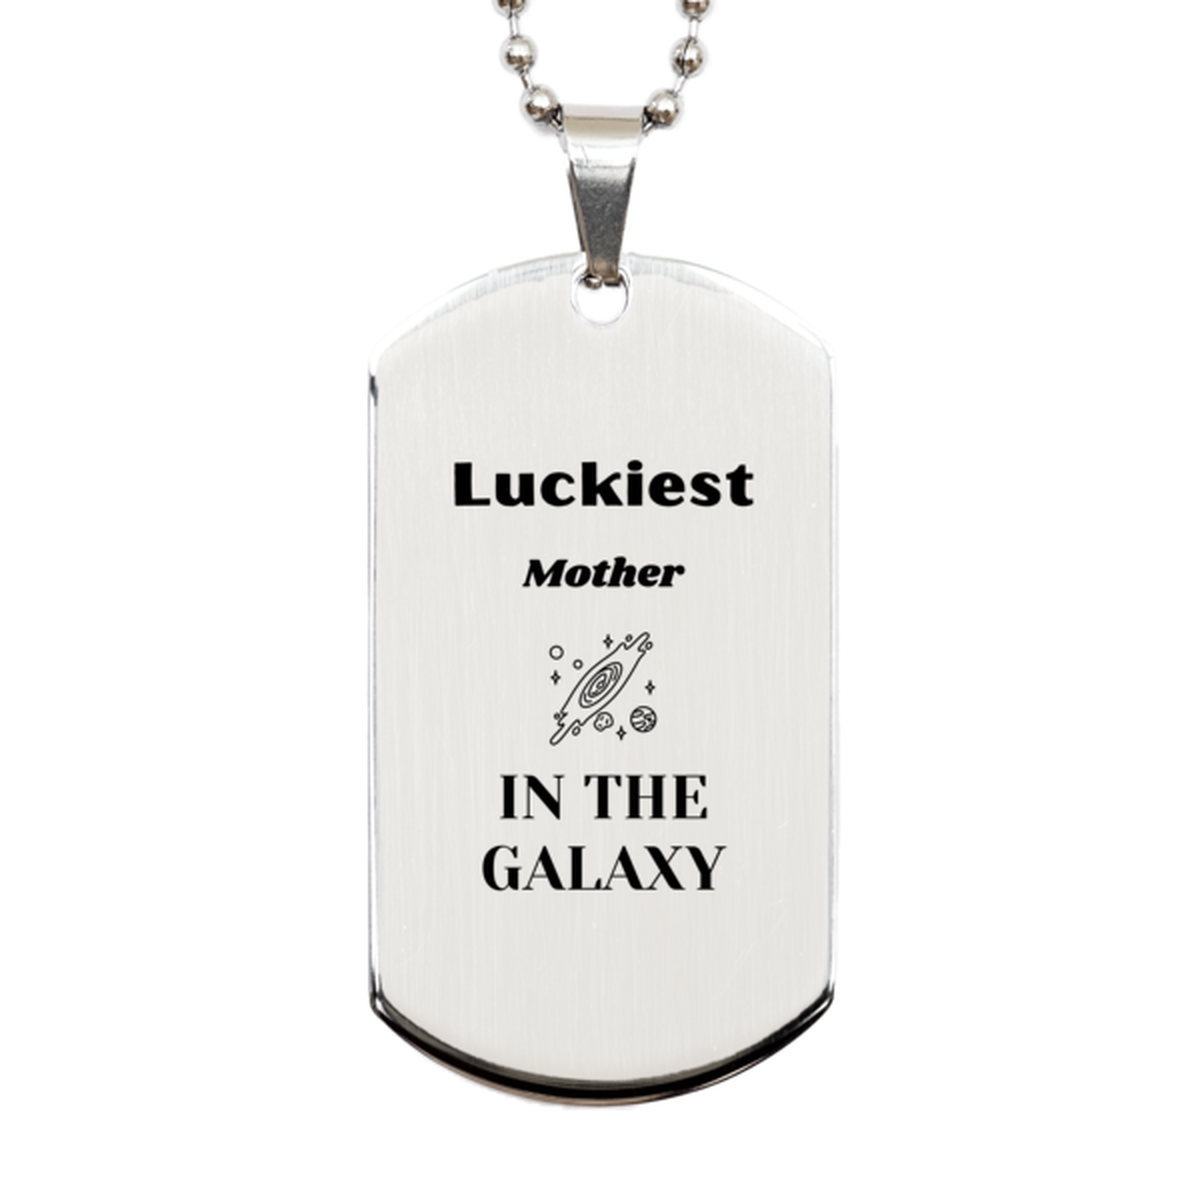 Luckiest Mother in the Galaxy, To My Mother Engraved Gifts, Christmas Mother Silver Dog Tag Gifts, X-mas Birthday Unique Gifts For Mother Men Women